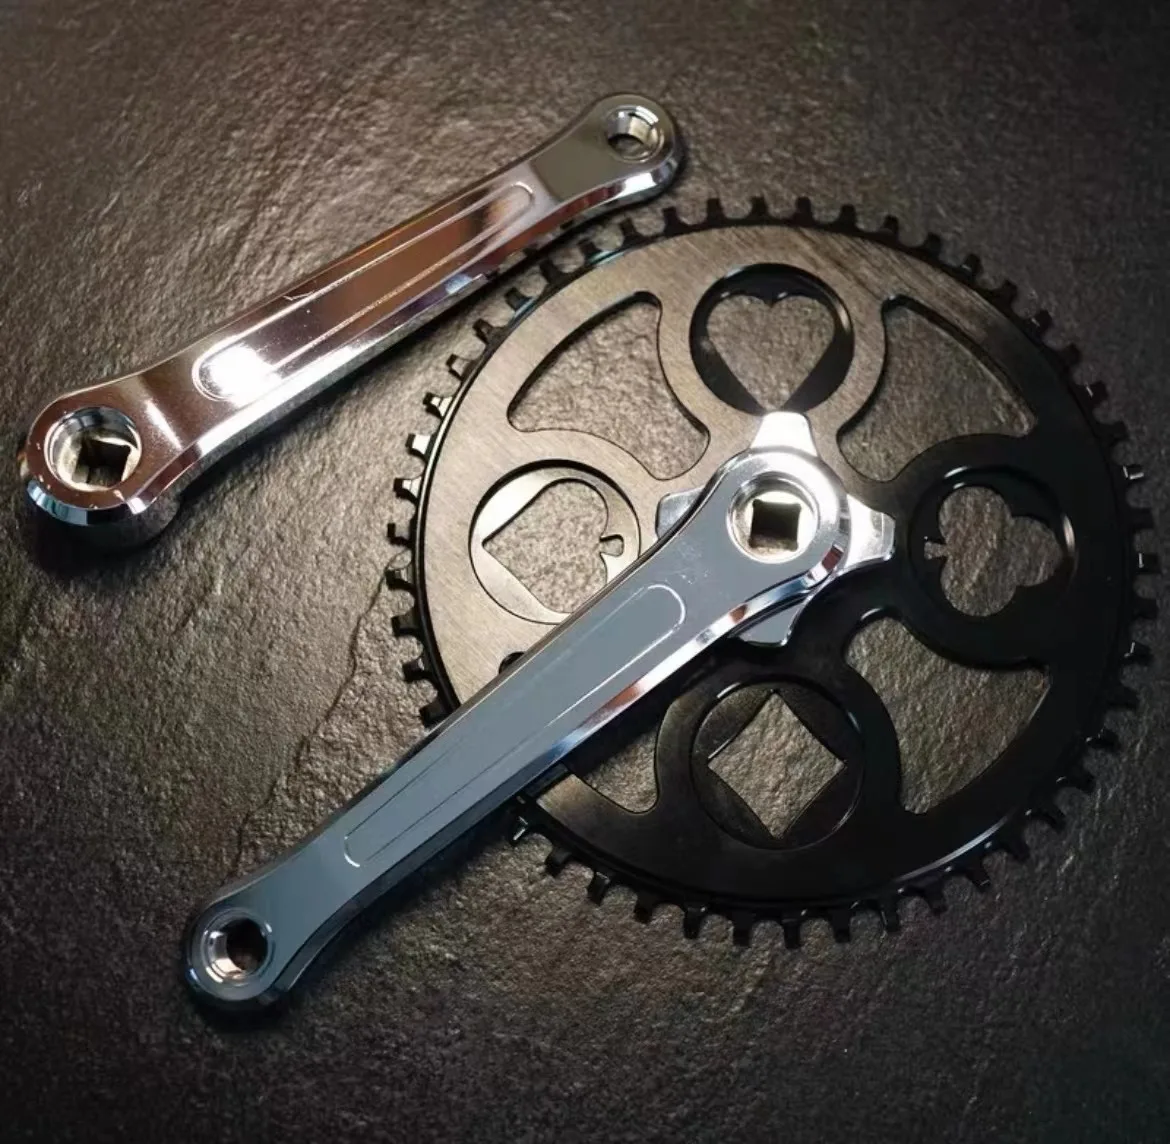 poker-cranks-return-to-the-ancients-chainrings-46t-limited-and-out-of-print